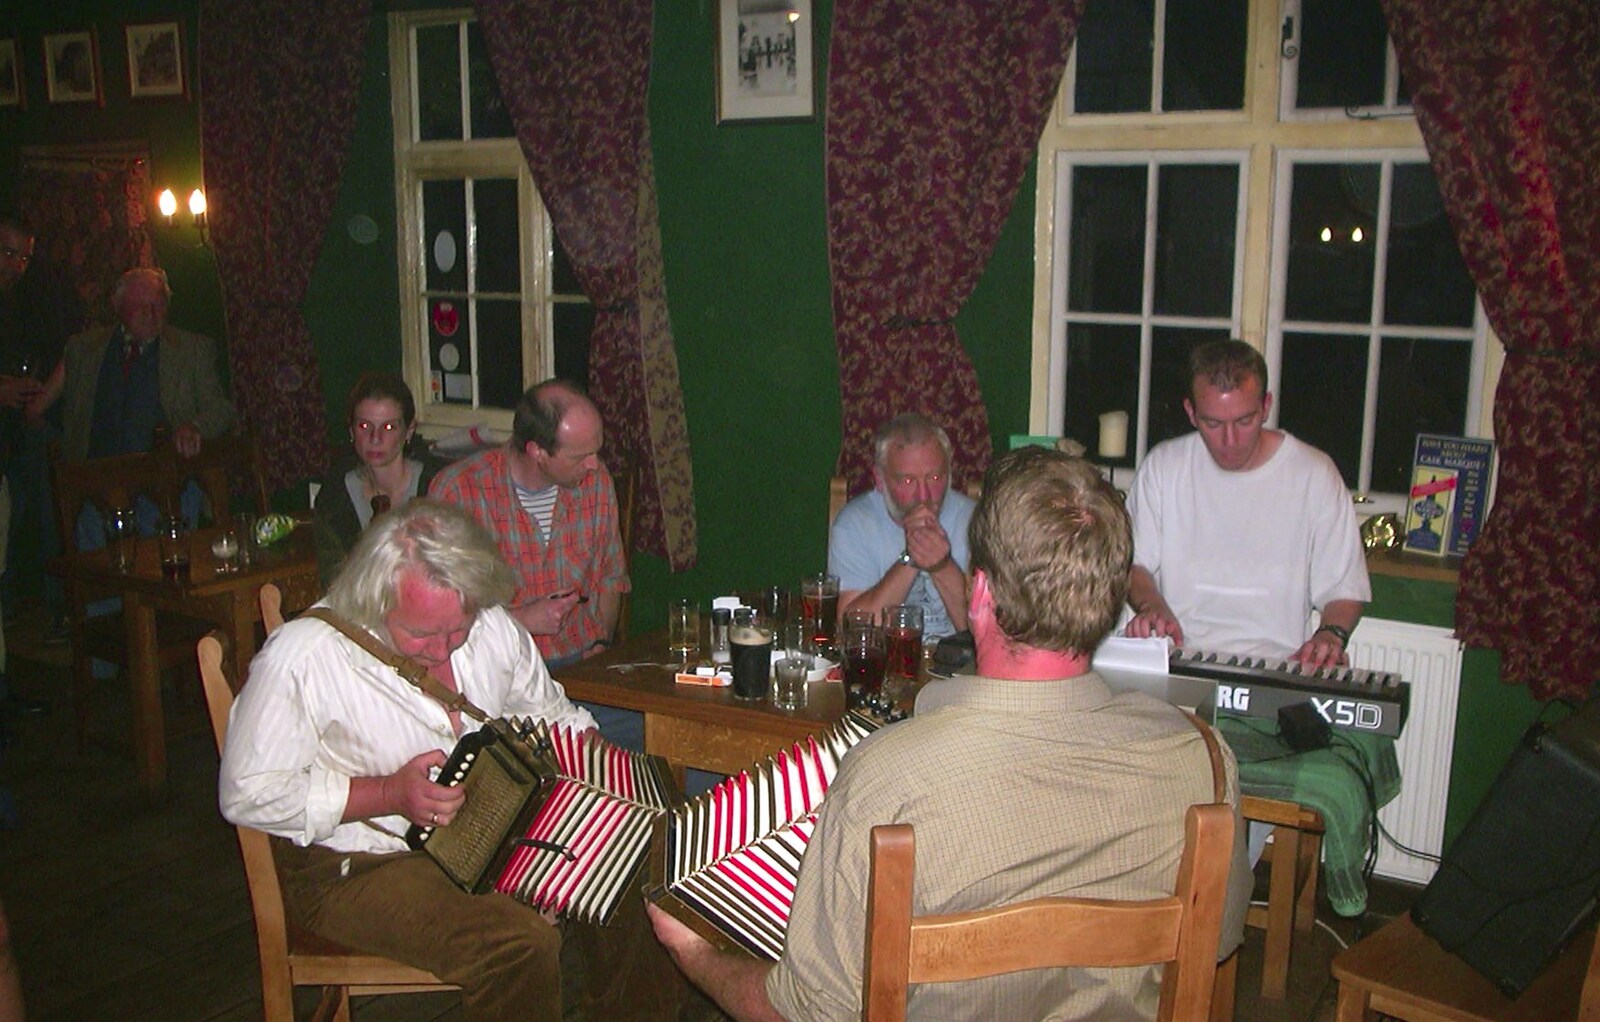 Folk band in the Hoxne Swan from The BSCC at Laxfield and Hoxne, Suffolk - 2nd May 2002